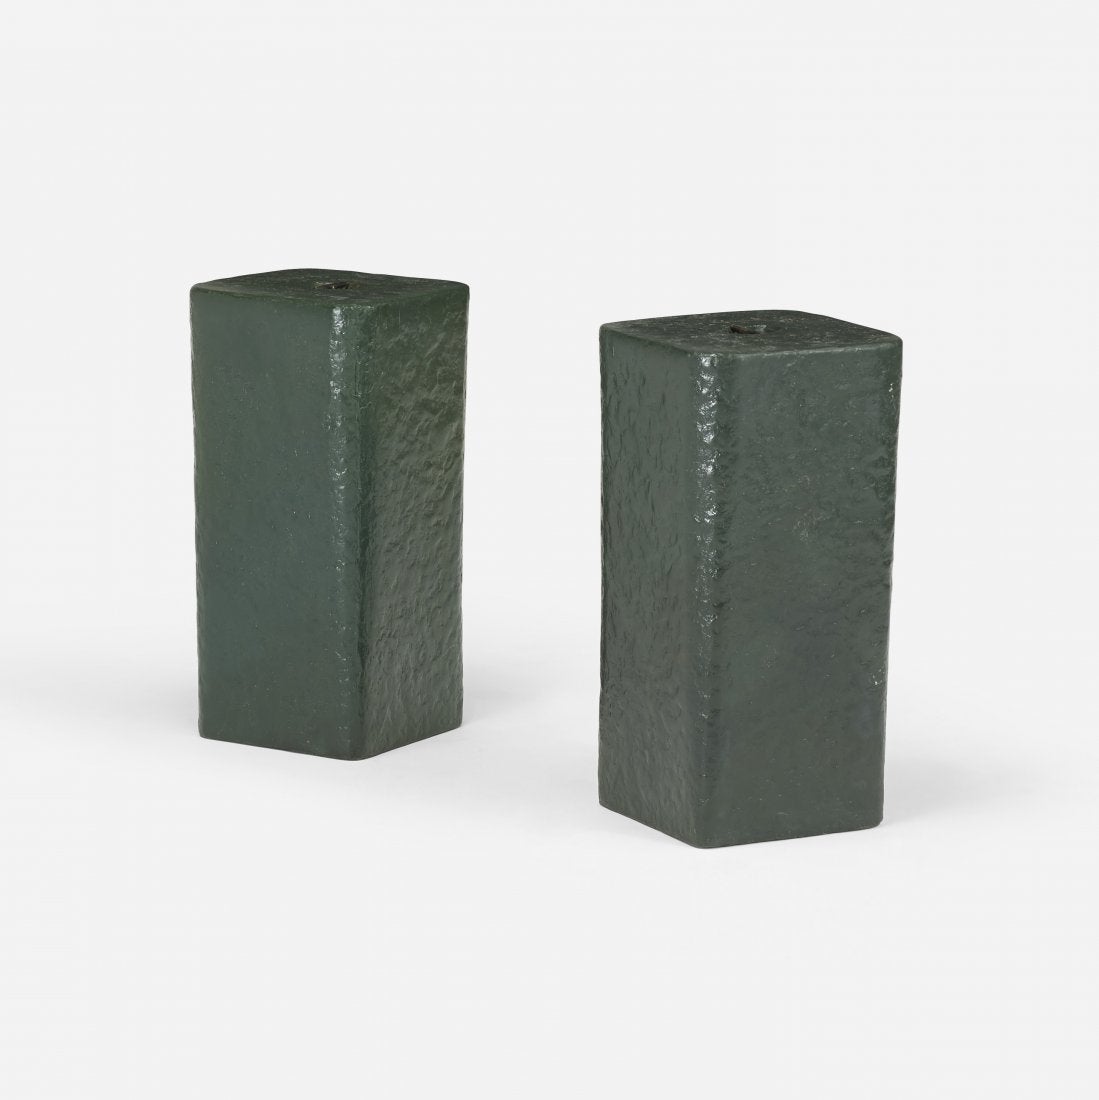 Gaetano Pesce pair of side tables for TBWA/Chiat/Day, New York. 
Italy, 1994.
(Green) resin, steel.
Literature: Gaetano Pesce, Bartolucci, ppg. 84-87 illustrate and discuss project Time-based Architecture, Heyden, Leupen, Heijne and von Zwol,